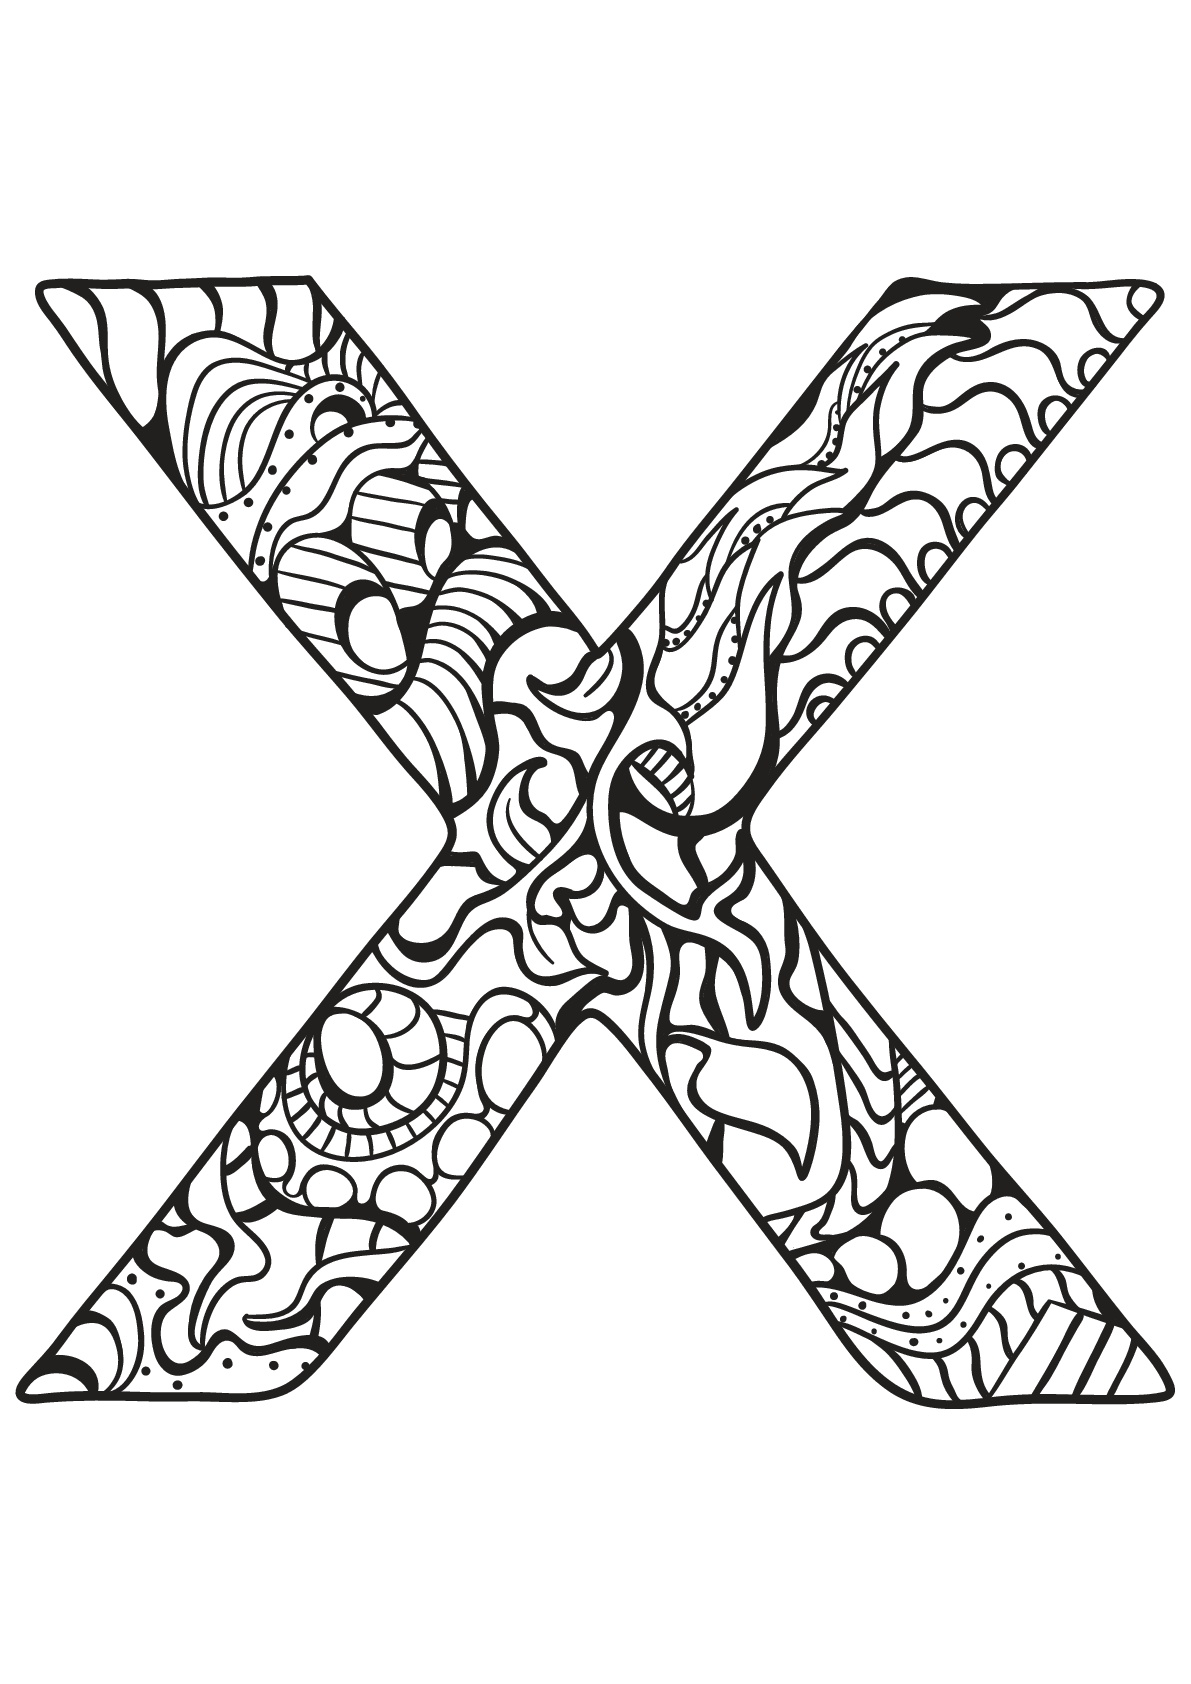 Download Alphabet to color for kids : X - Alphabet Kids Coloring Pages